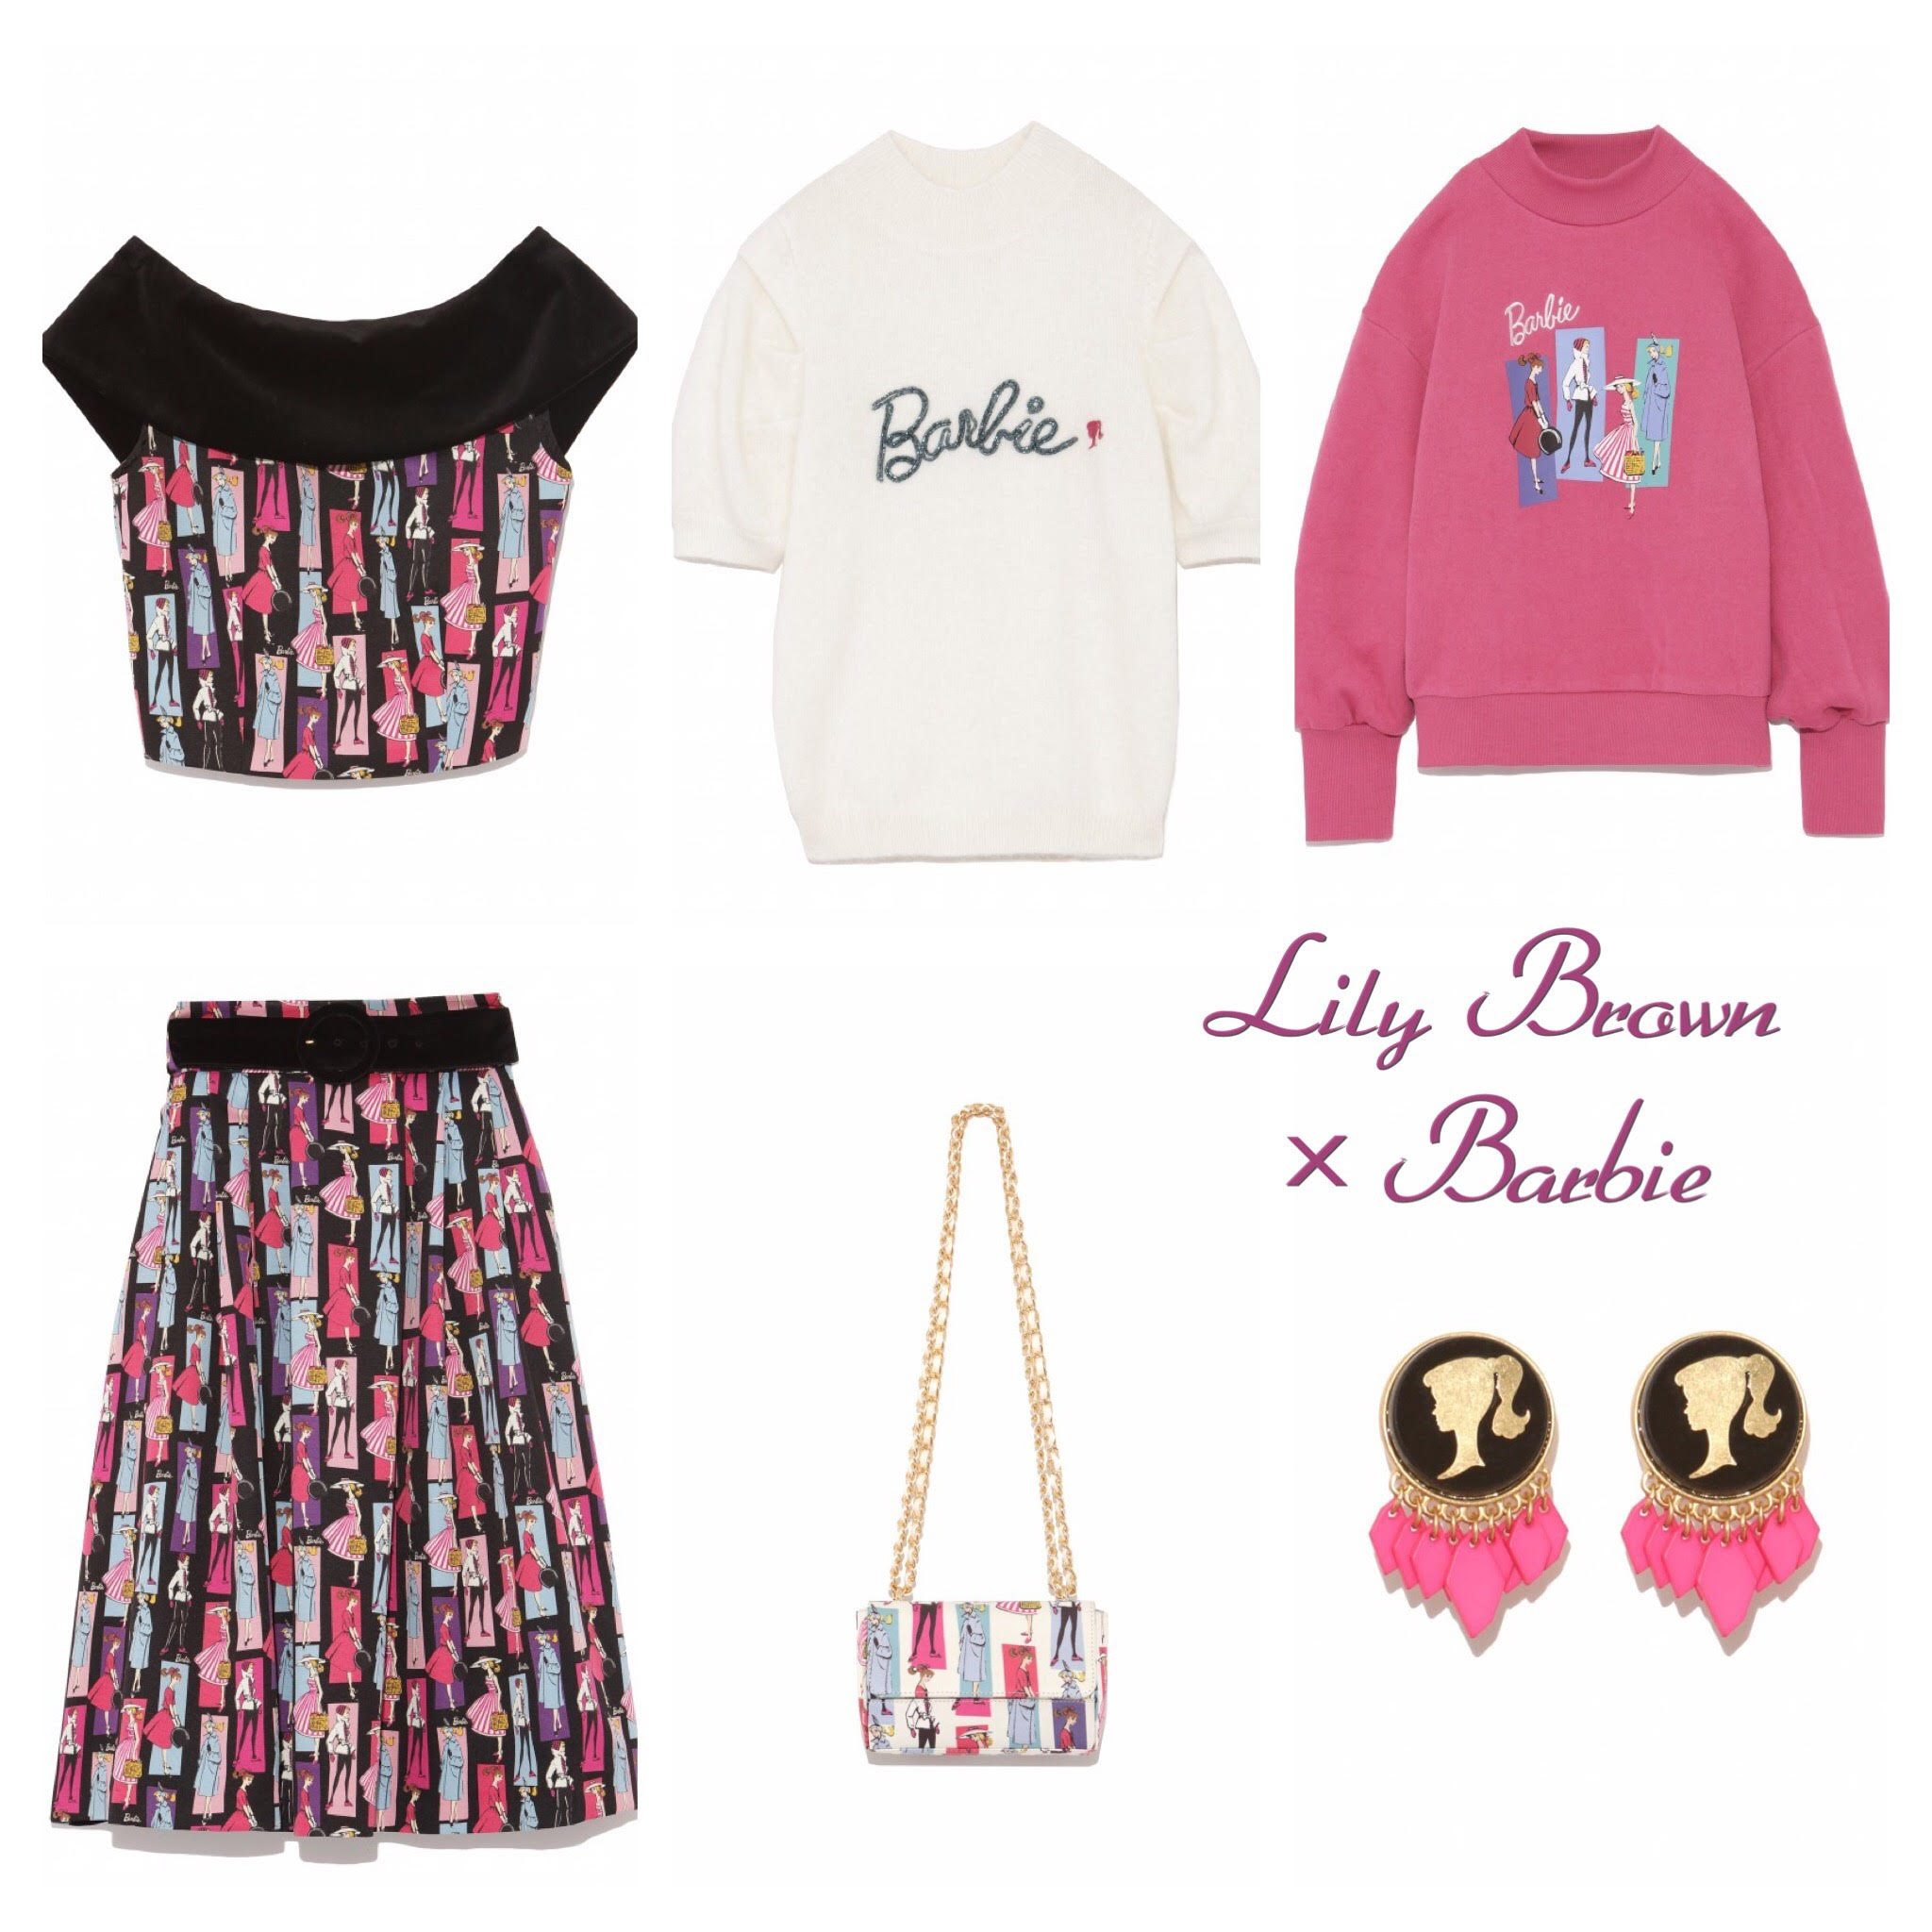 Lily Brown meets Barbie👩💍✨ 乙女心をくすぐるガーリーなコラボアイテムは必見🌈